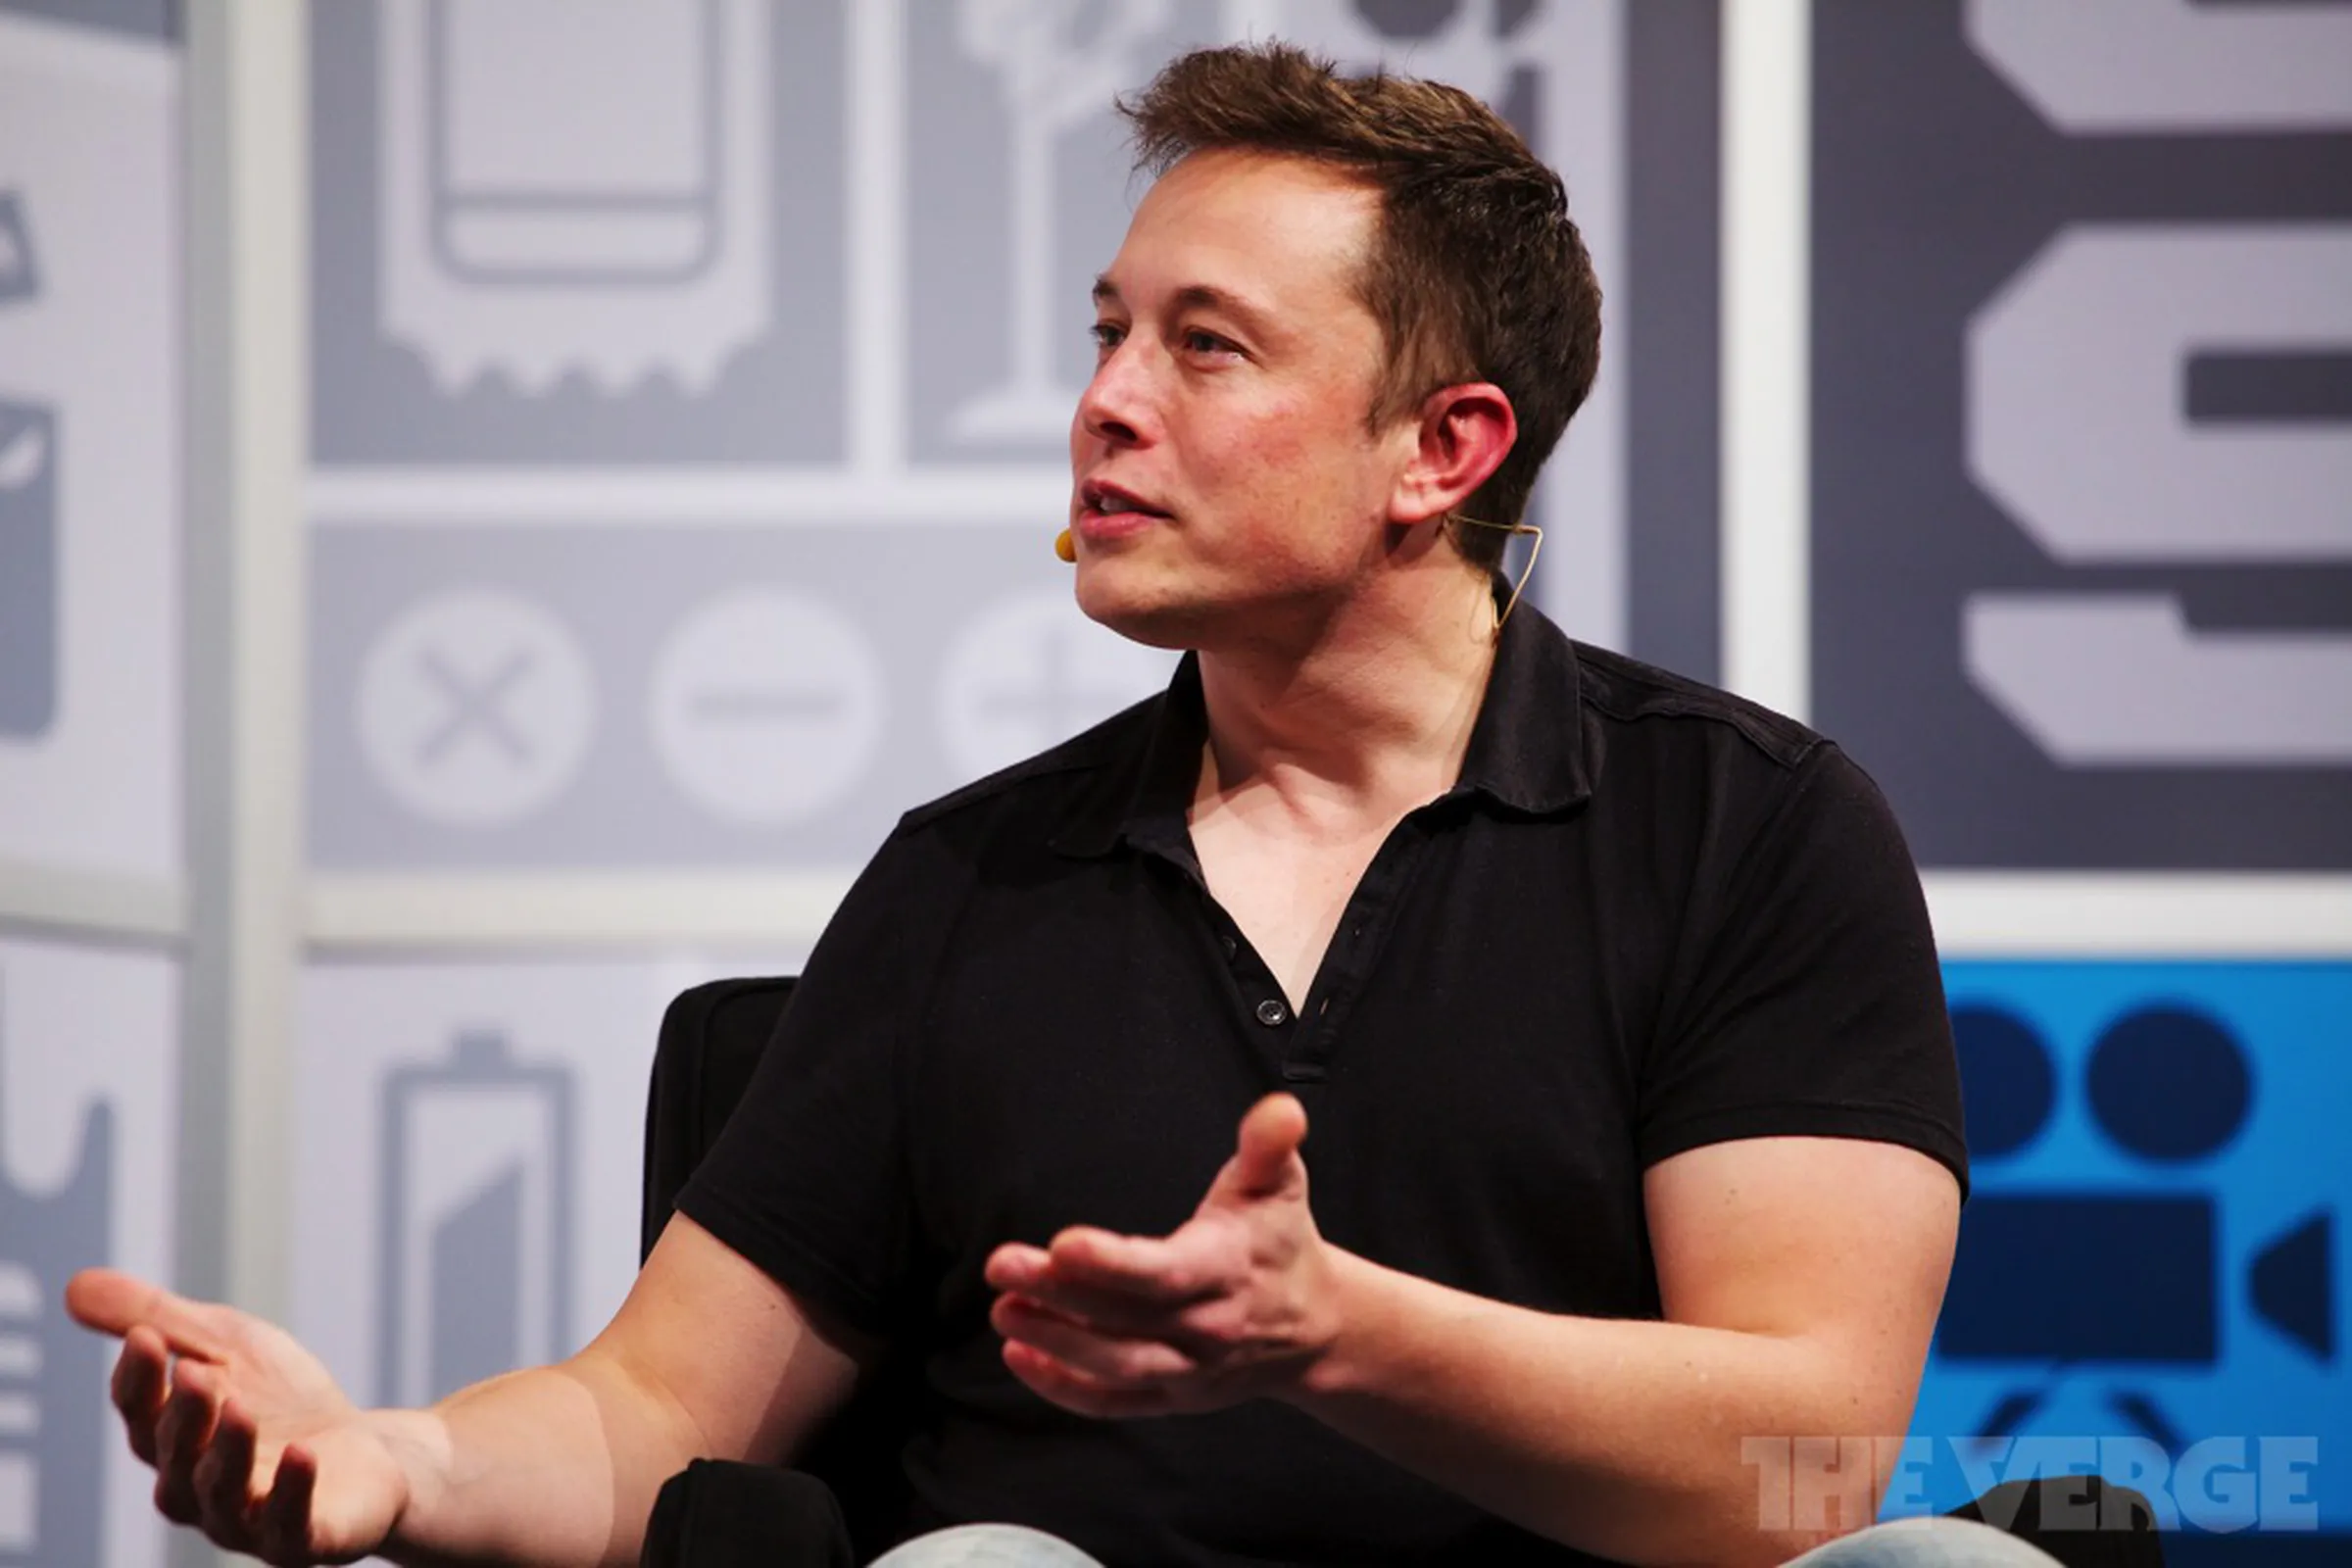 In this comprehensive article, we'll delve into the story behind Elon Musk's hair transplant, and how it affected his image.